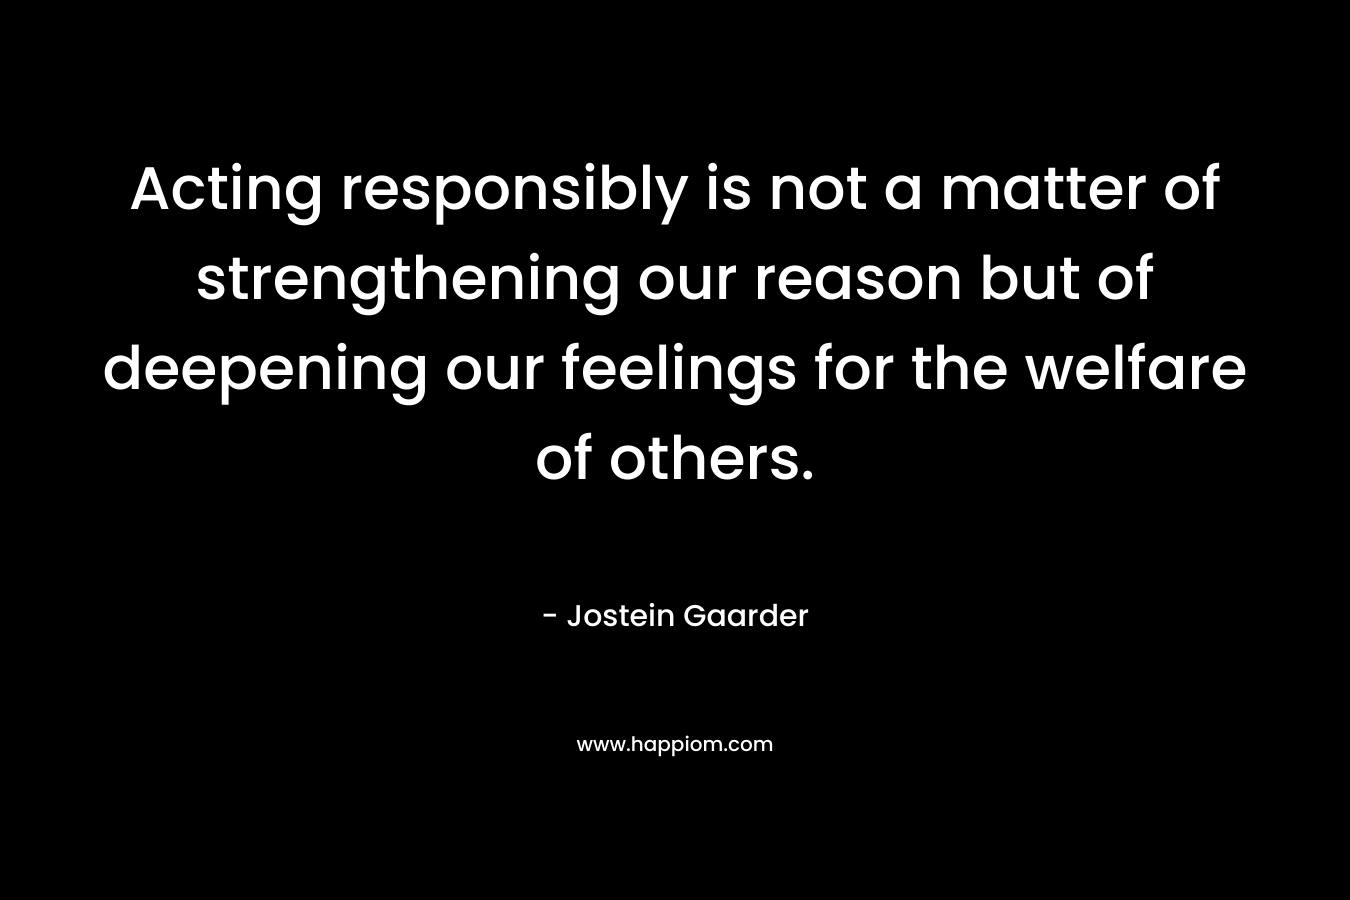 Acting responsibly is not a matter of strengthening our reason but of deepening our feelings for the welfare of others.